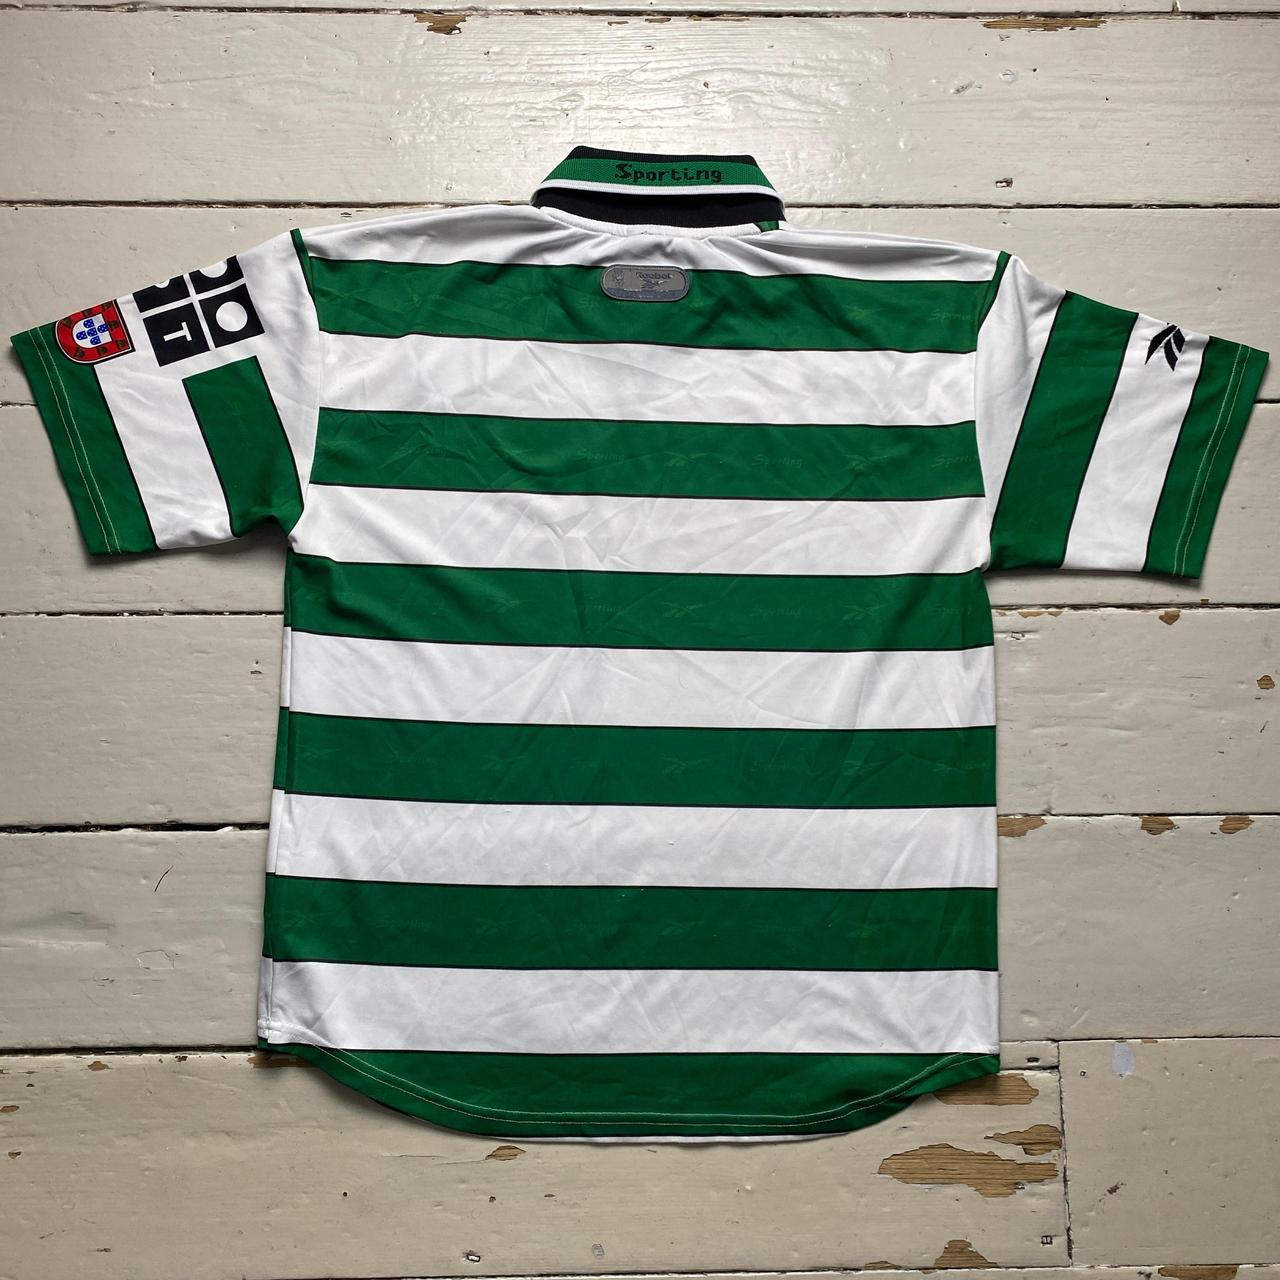 Sporting Club Portugal 2001 2002 Vintage Reebok Football Jersey Green and White Stripe